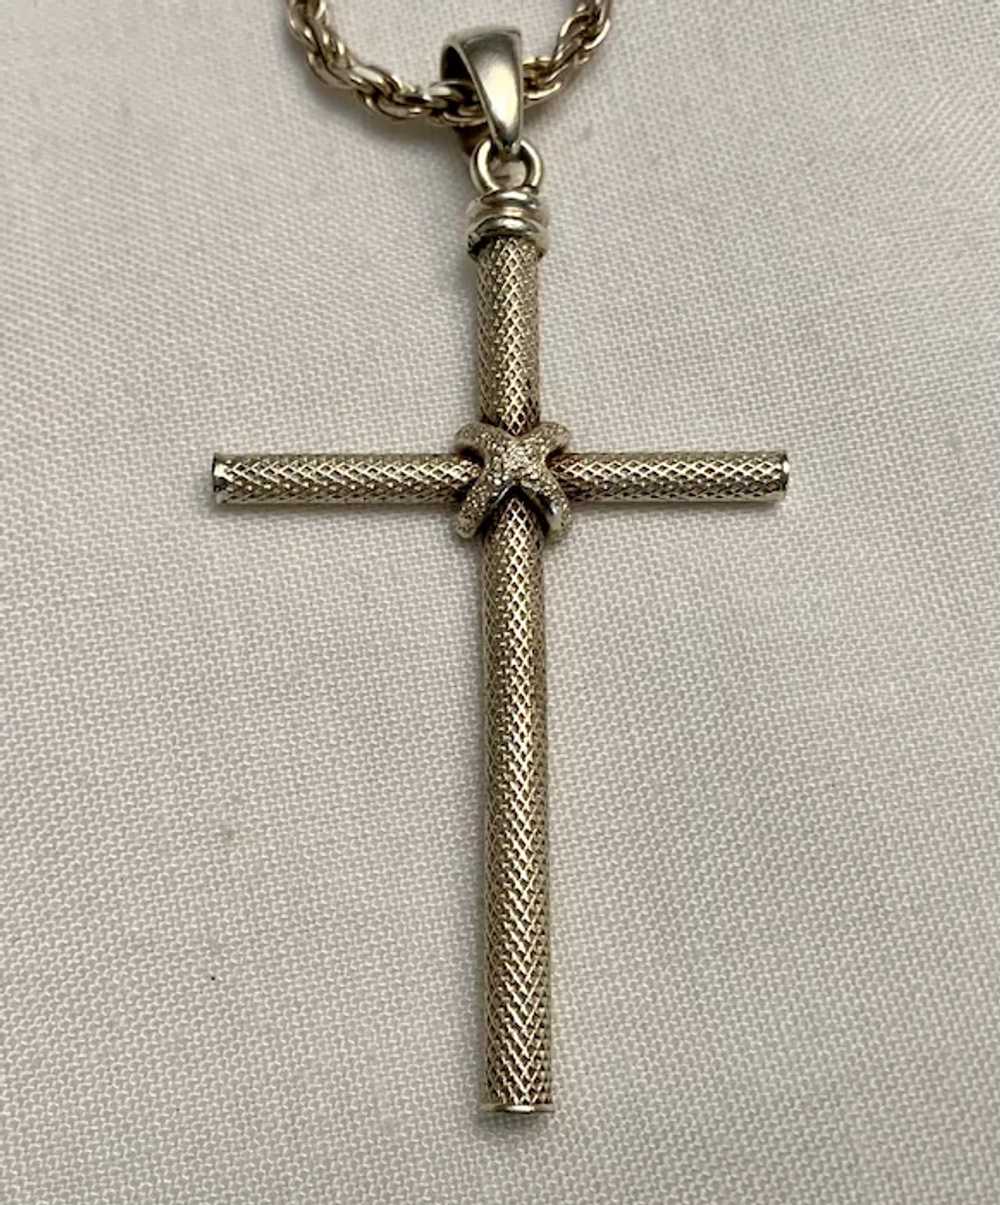 Stunning Sterling Silver Cross with Sterling Chain - image 2